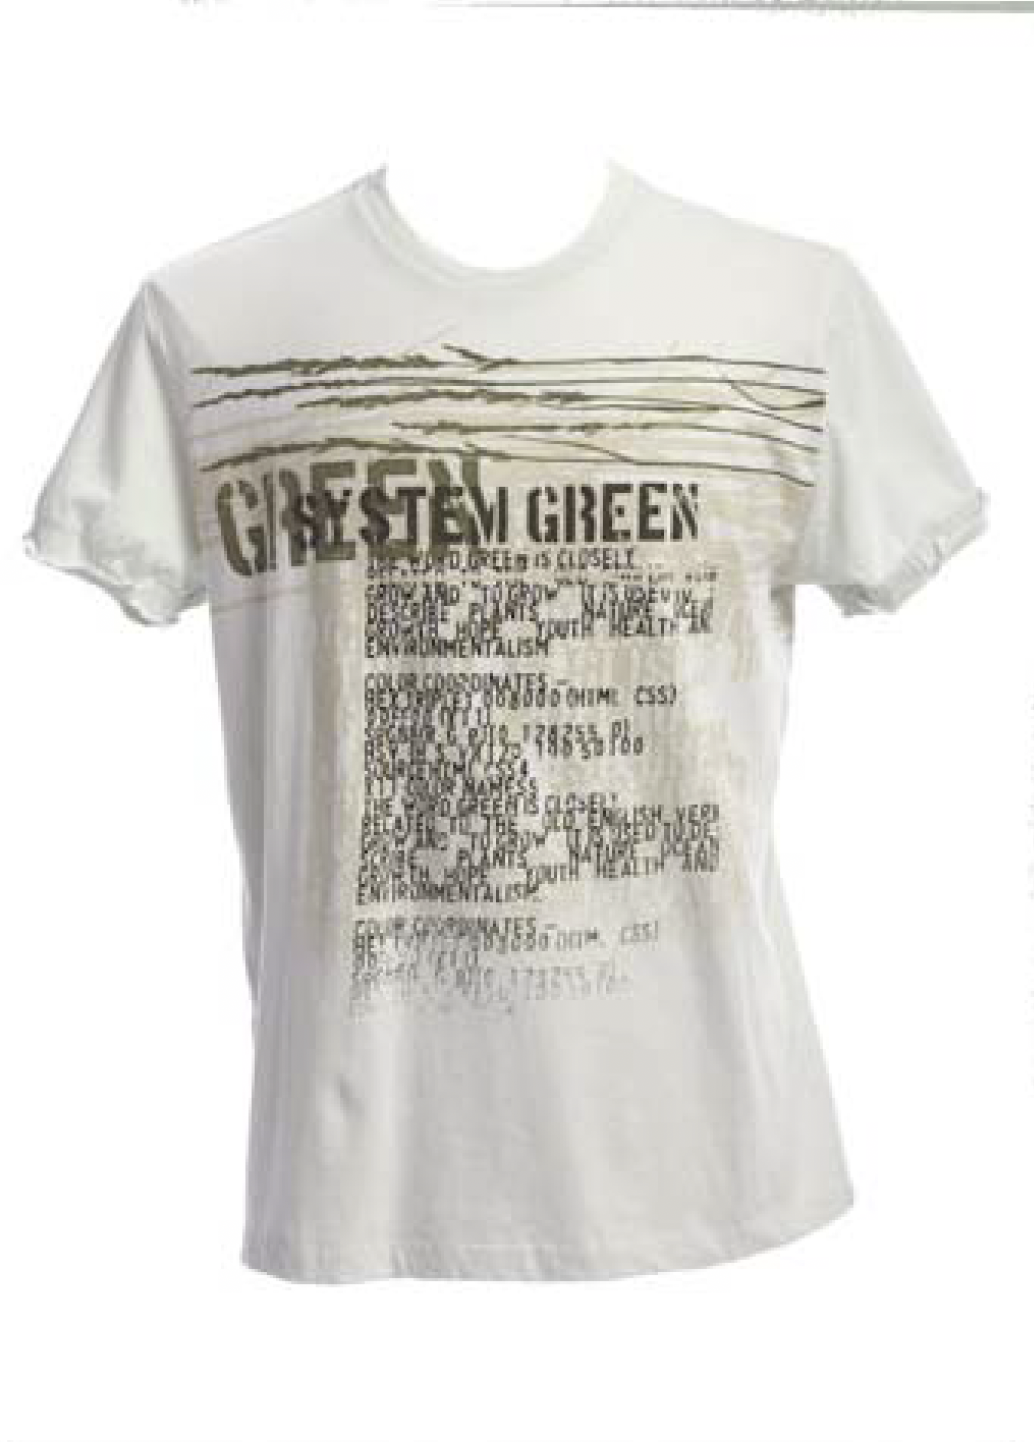 Itsus Vintage Men's T-Shirt "Grass" in Cream (2009 Collection) - Email Us to Order